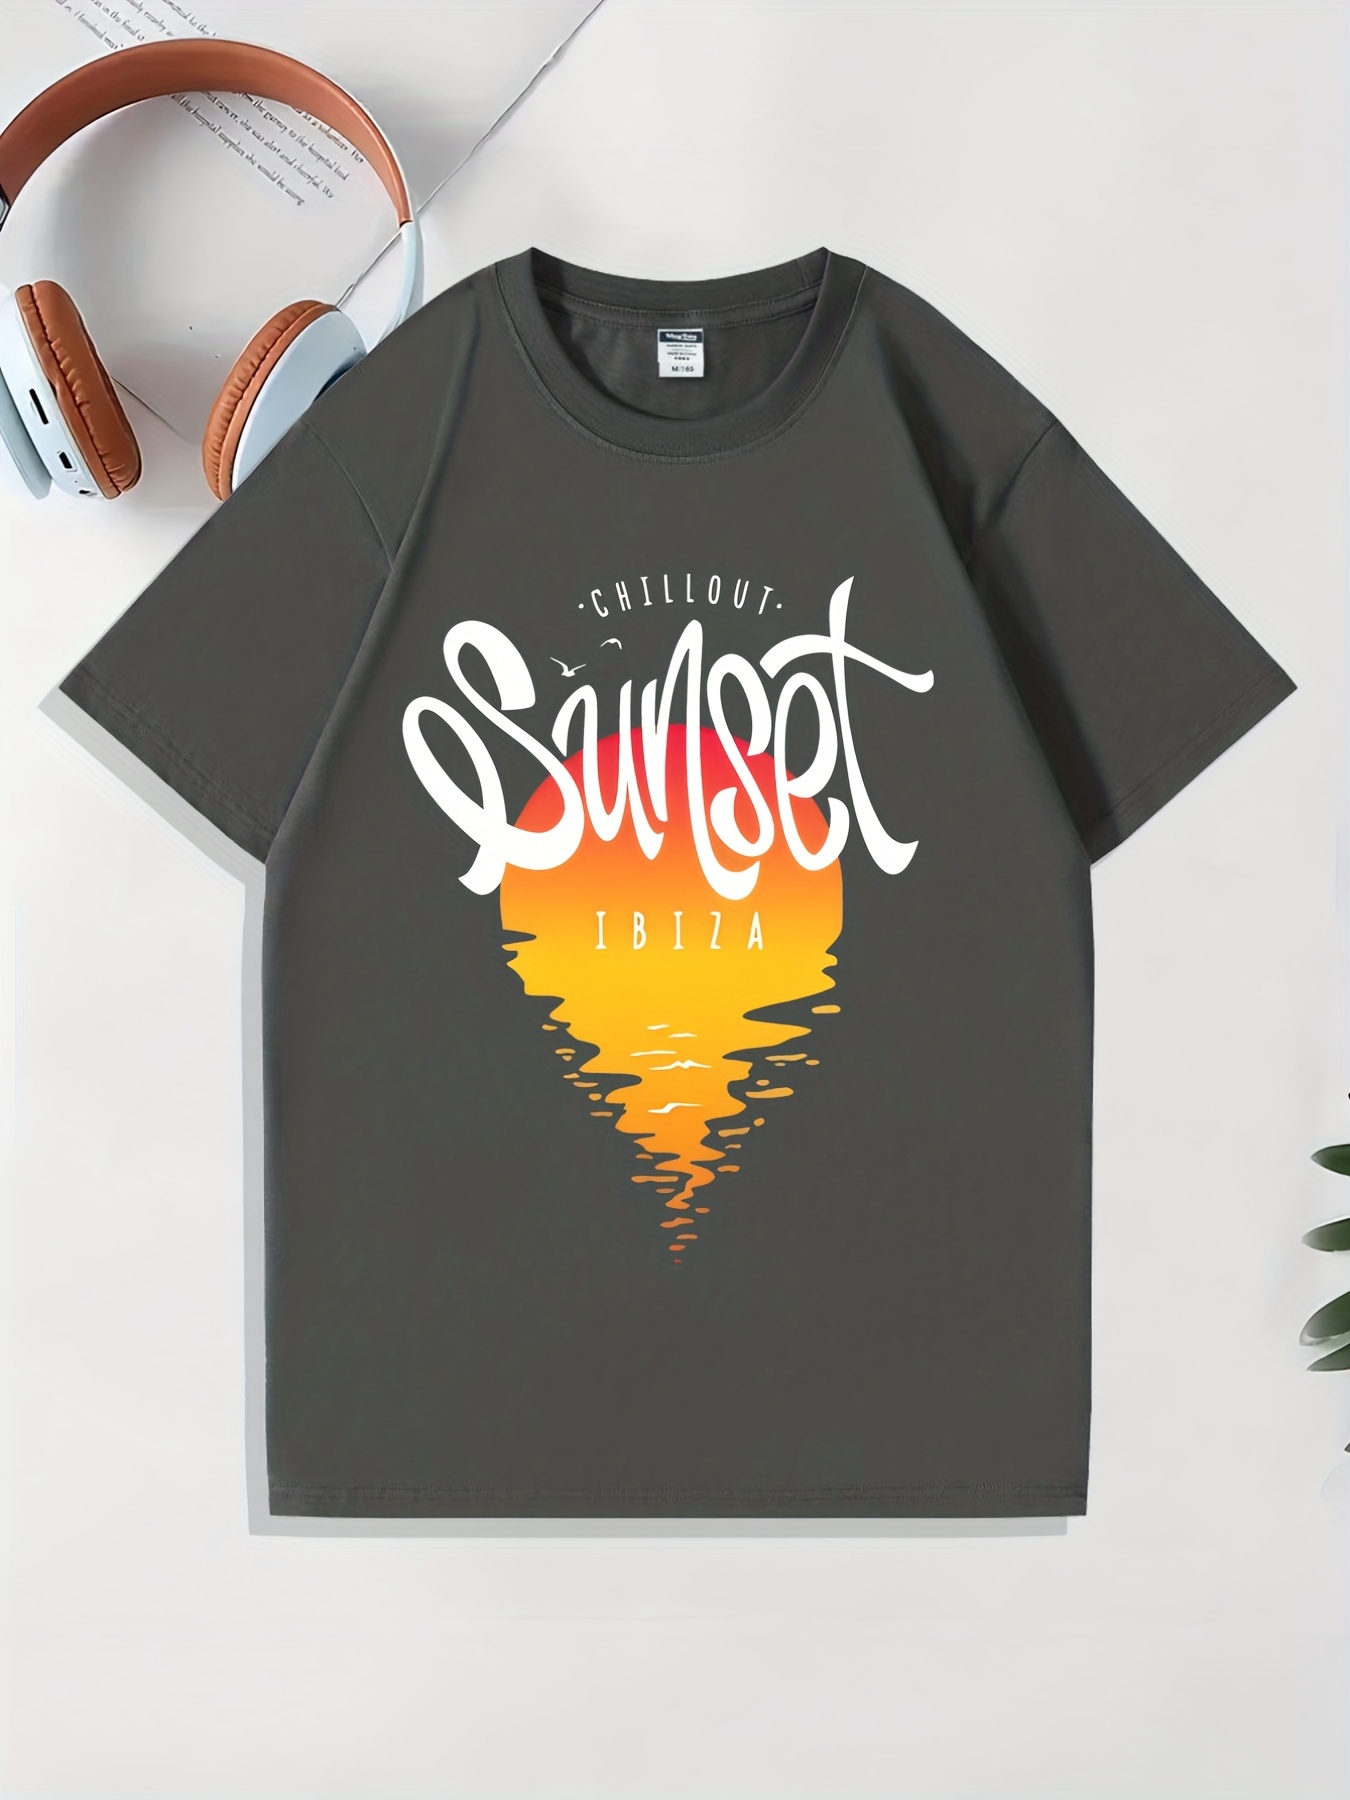 Chillout Sunset Print Mens Trendy Cotton T Shirt Casual Slightly